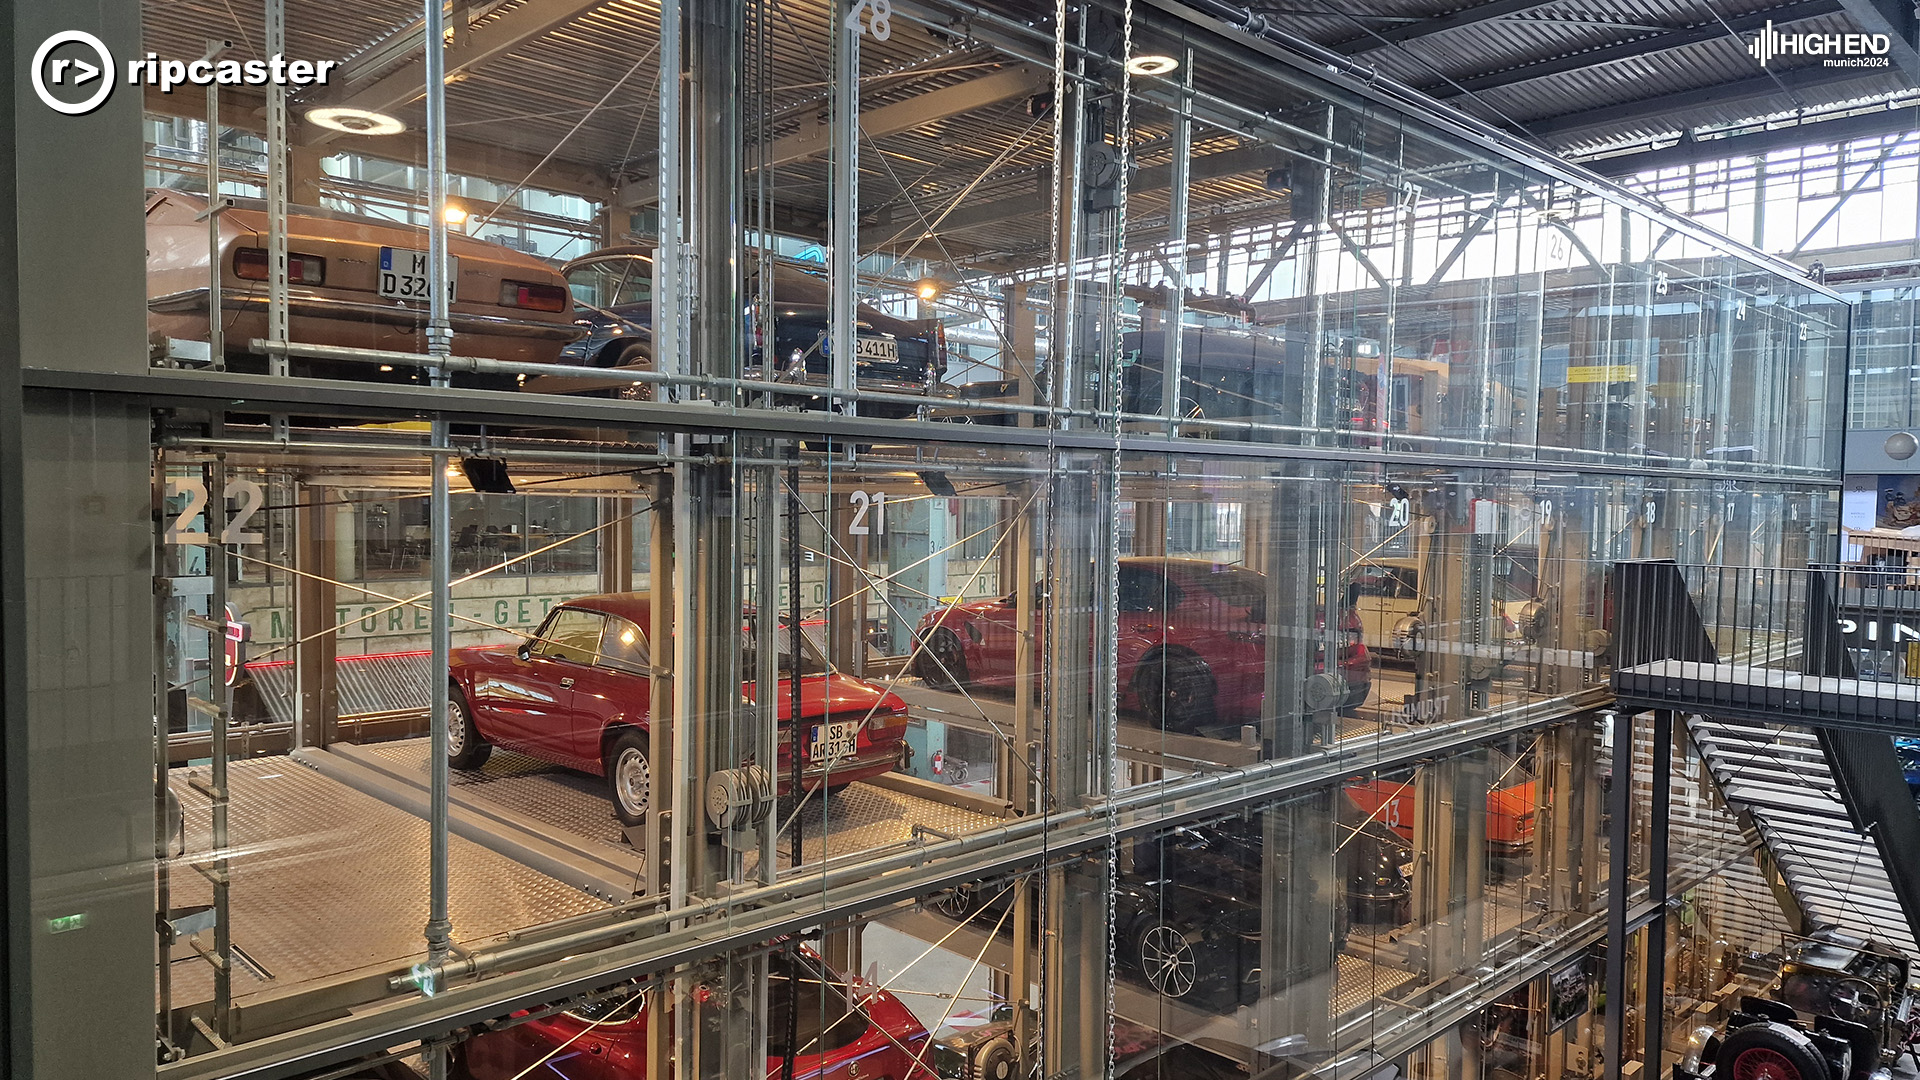 Vintage cars in a thing that looks like a massive glass cabinet.